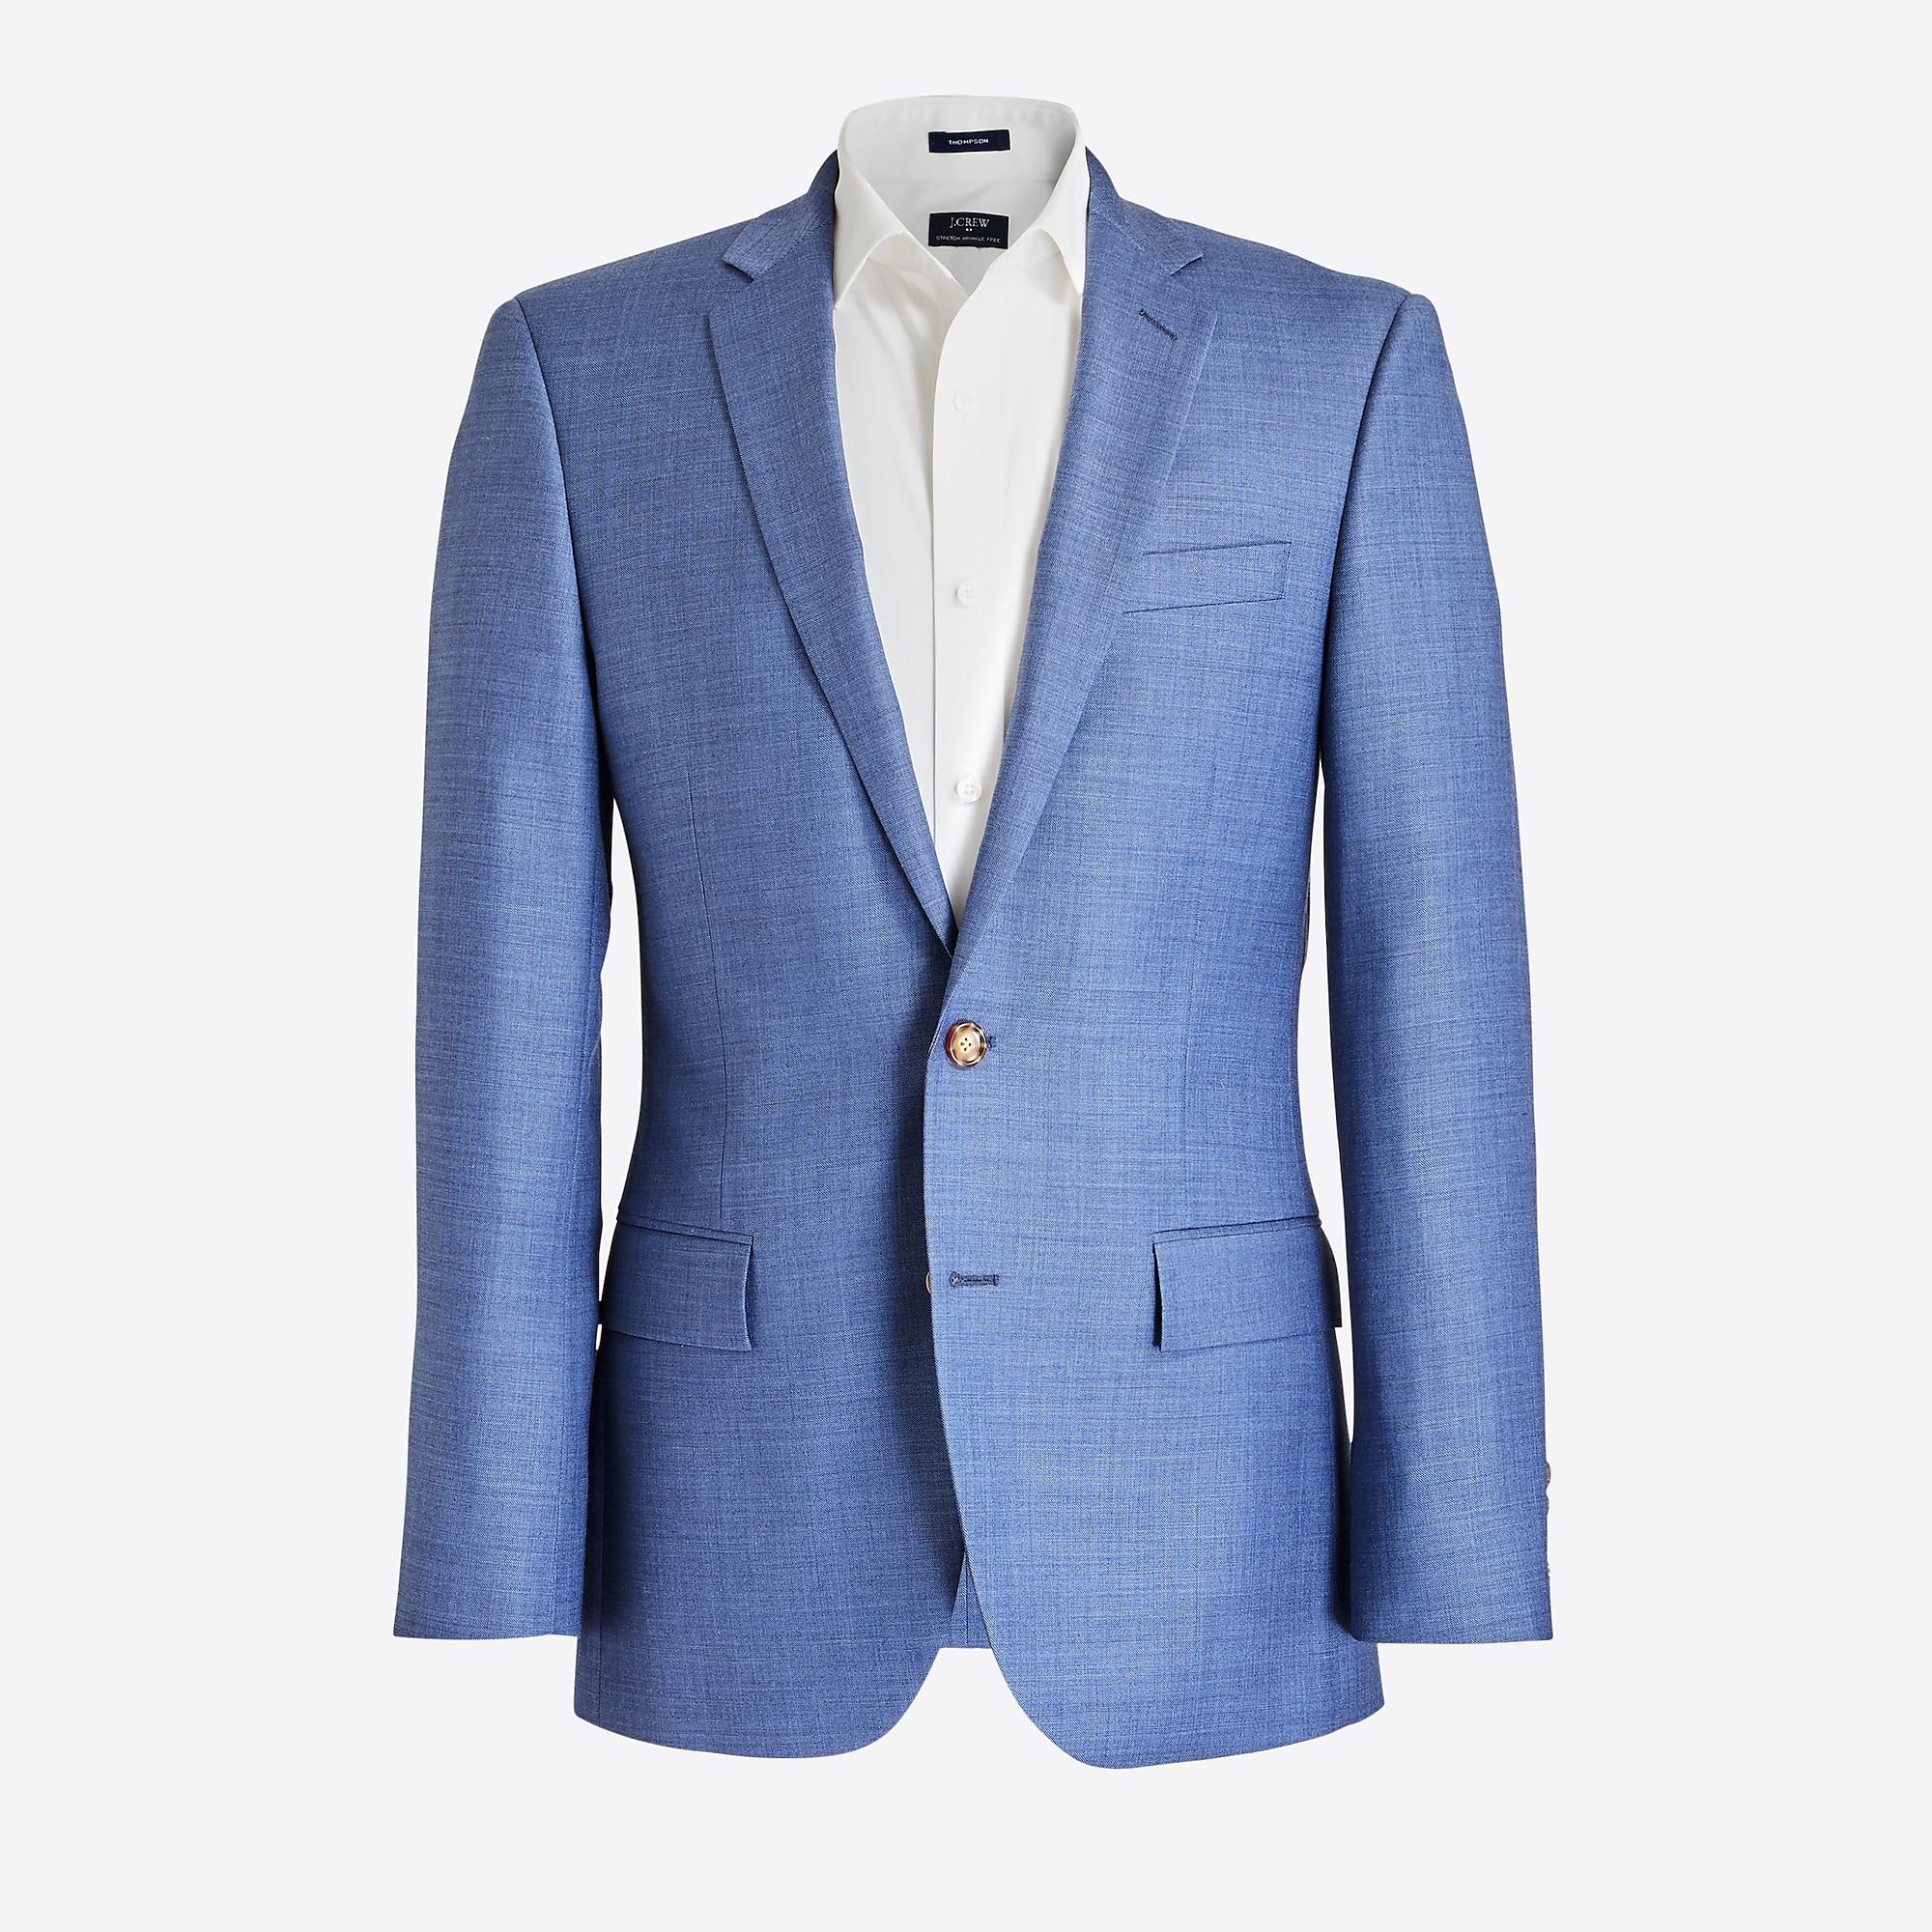 J.Crew Slim Thompson Suit Jacket In Worsted Wool in Blue for Men - Lyst